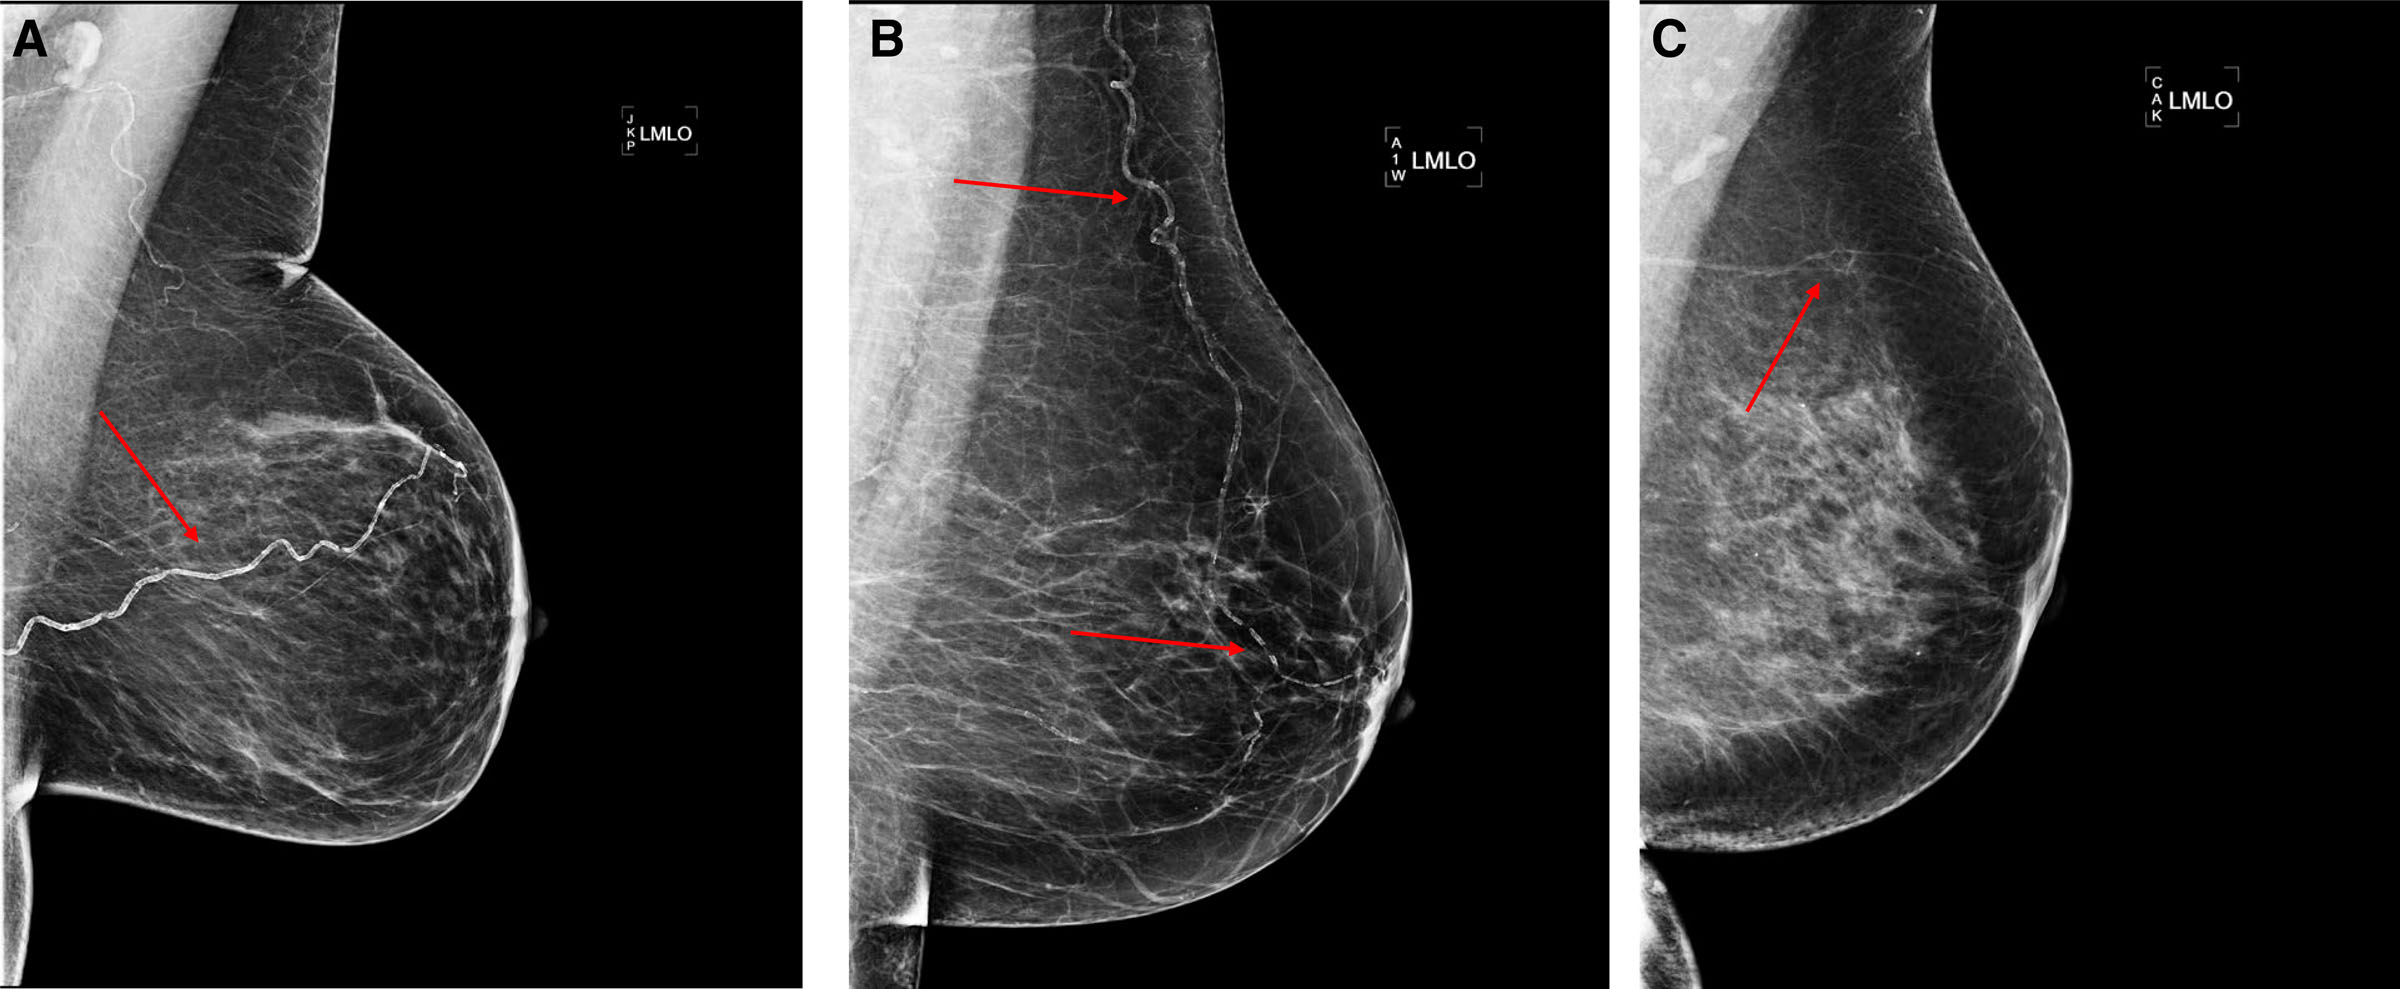 Study Shows Link Between Breast Arterial Calcification and Significant Cardiovascular Risks